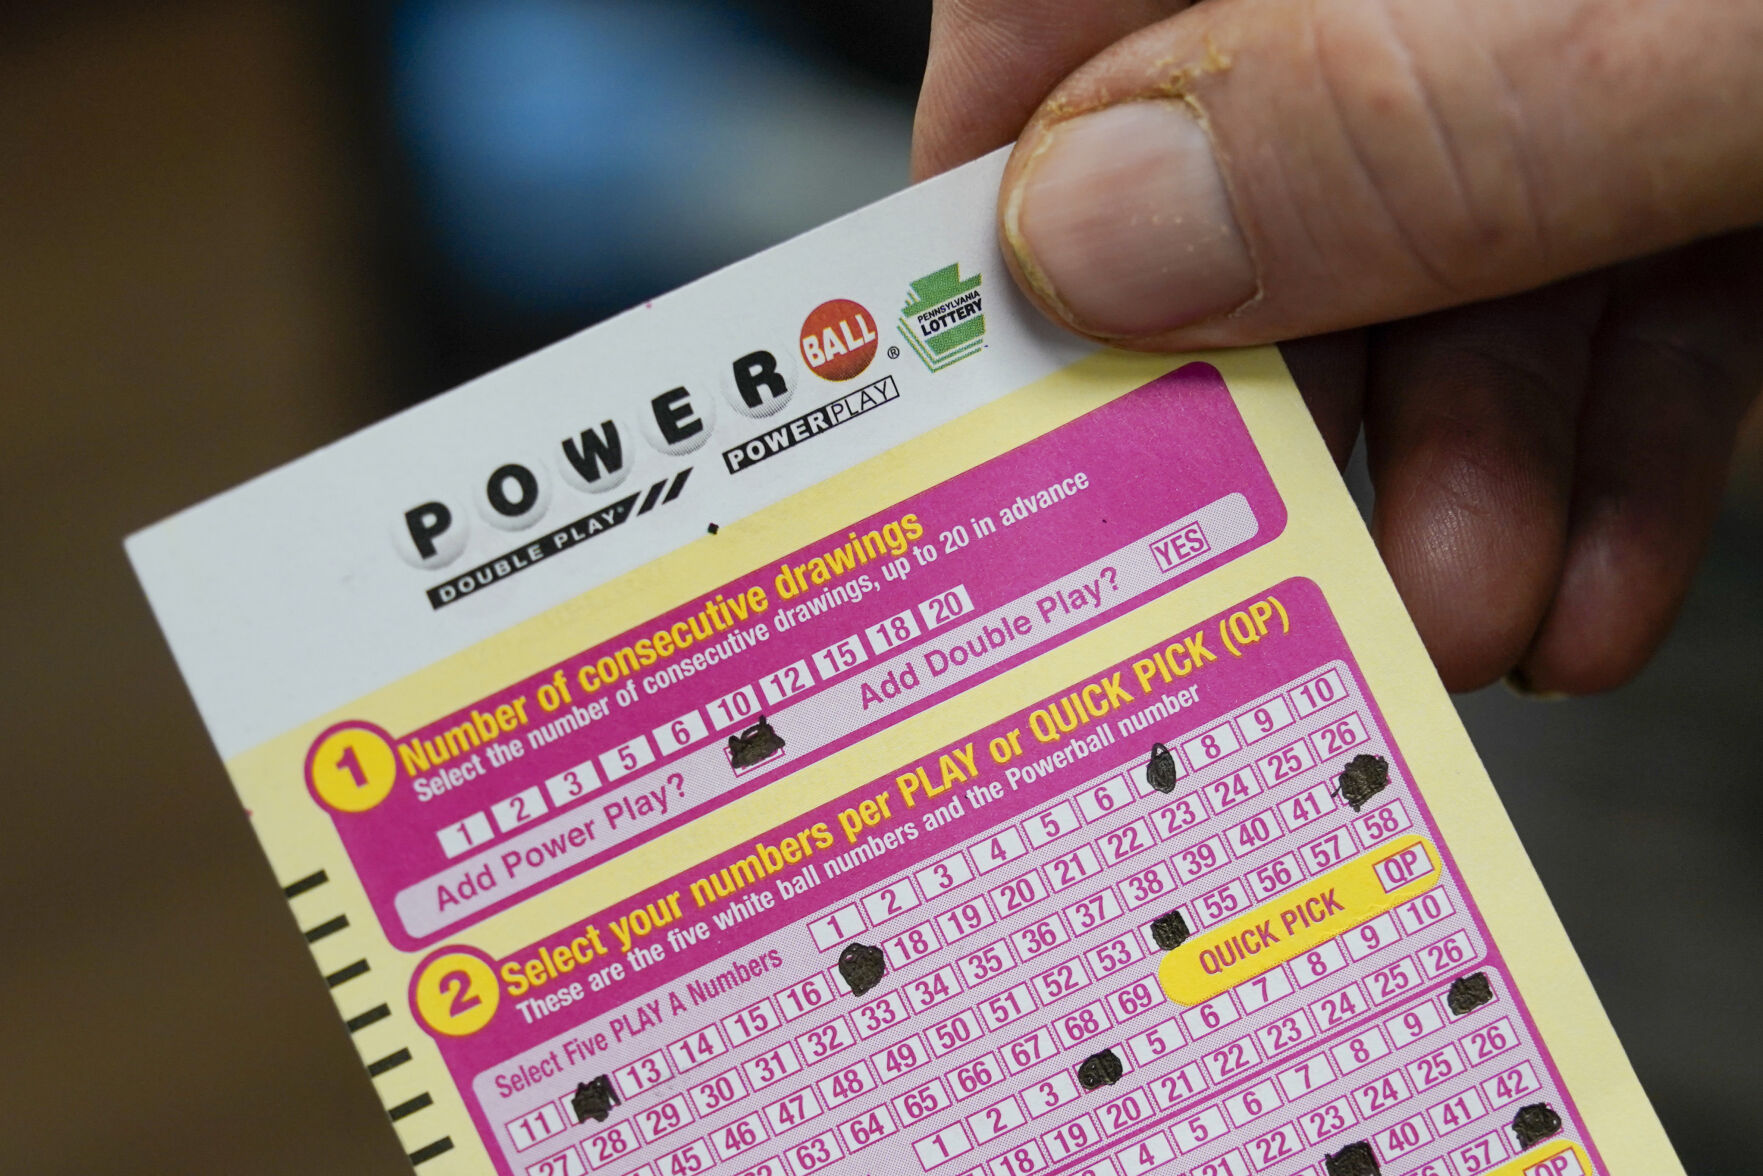 <p>FILE - A person shows his scan card for their personal selection numbers for a ticket for a Powerball drawing on Nov. 7, 2022 in Renfrew, Pa. An $835 million Powerball jackpot will be up for grabs Wednesday, Sept. 27, 2023, for players willing to risk a couple dollars and brave incredibly long odds.(AP Photo/Keith Srakocic, File)</p>   PHOTO CREDIT: Keith Srakocic 